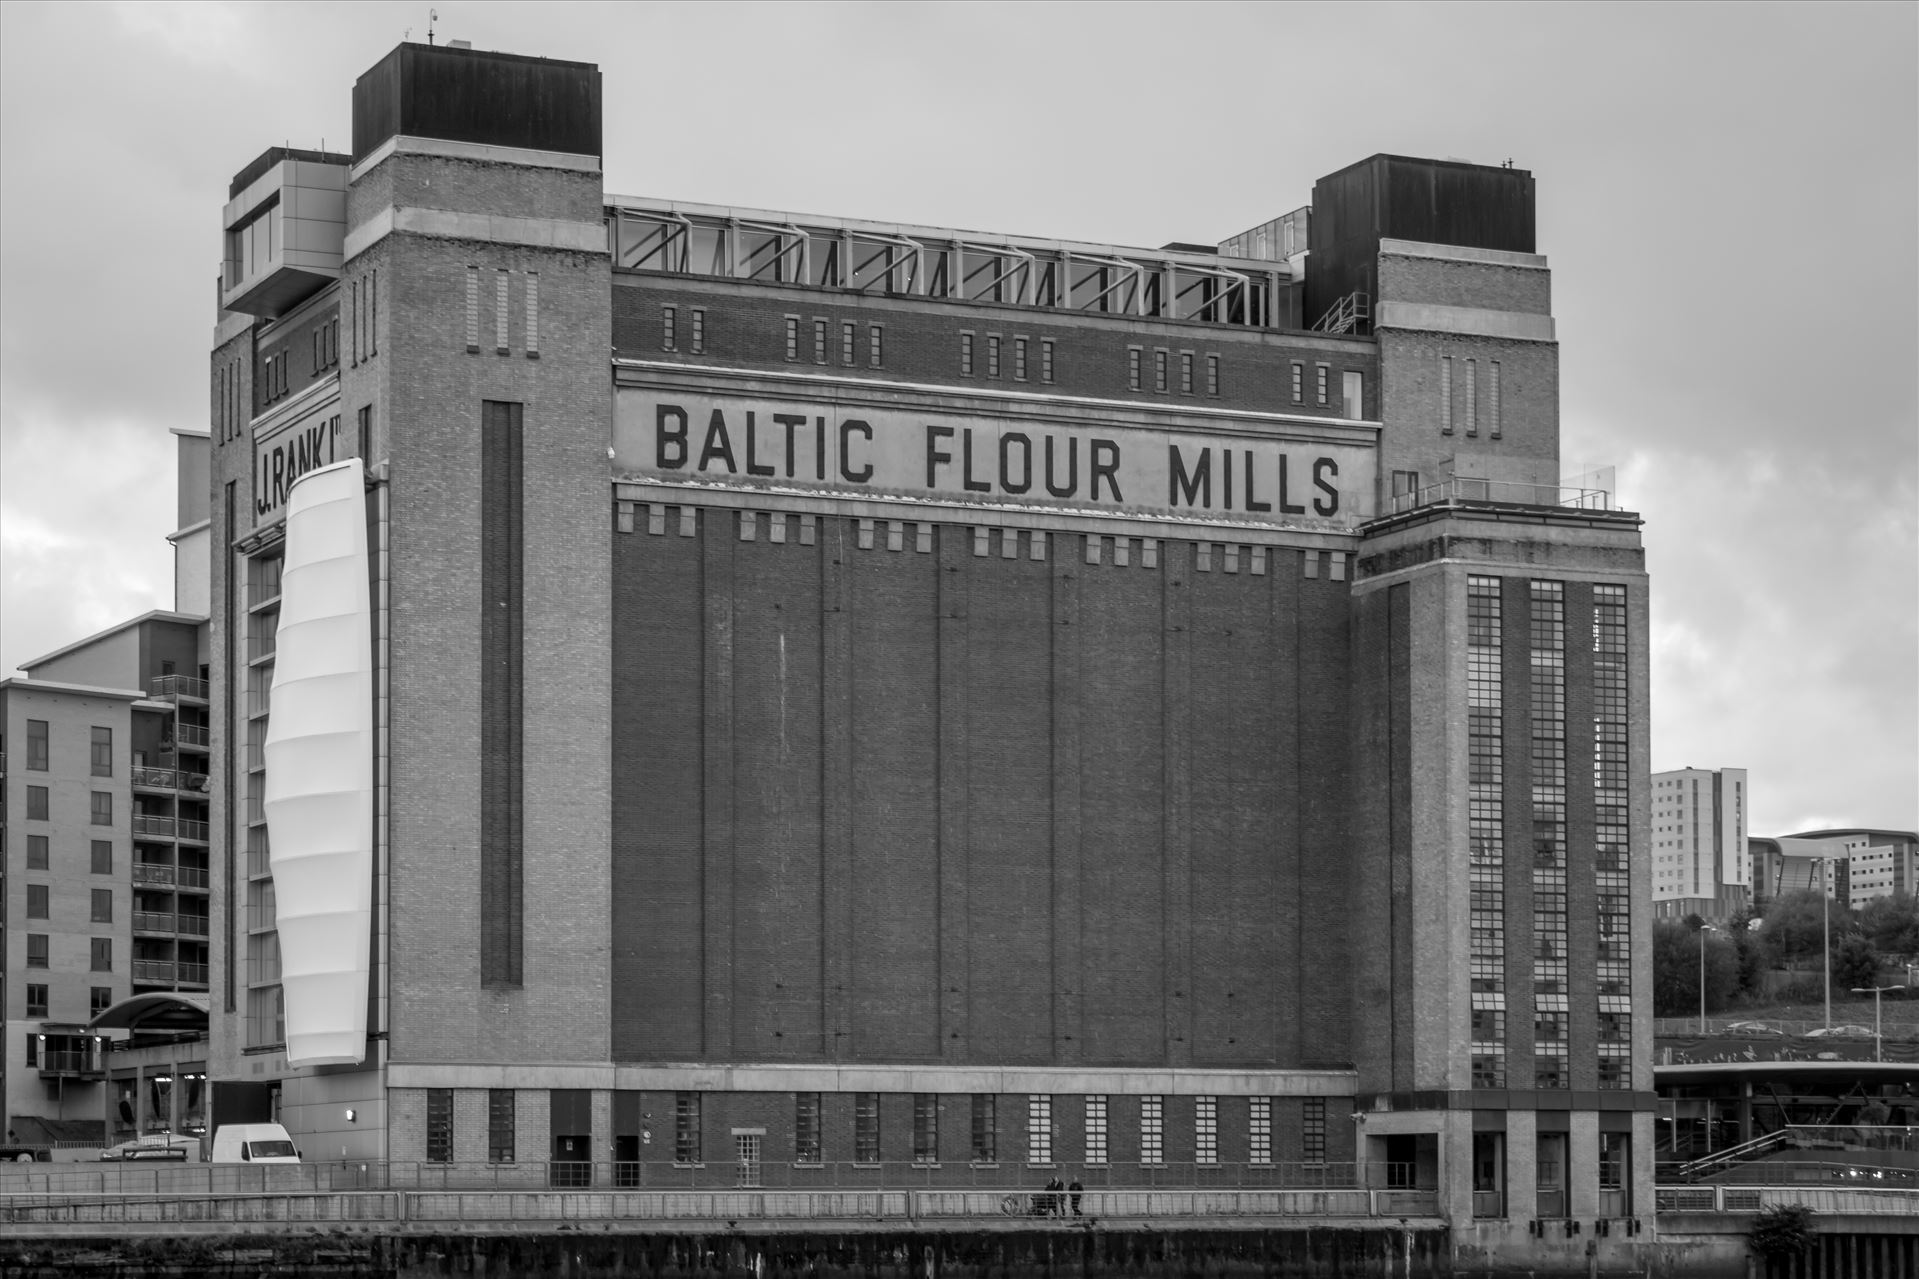 The Baltic, Gateshead QuaysideHoused in the Landmark, J R Rank Flour Mill building, its a major International centre for contemporary art. 2,600 square metres of art space, and boasts a rooftop restaurant with magnificent view of the River Tyne and Quayside.